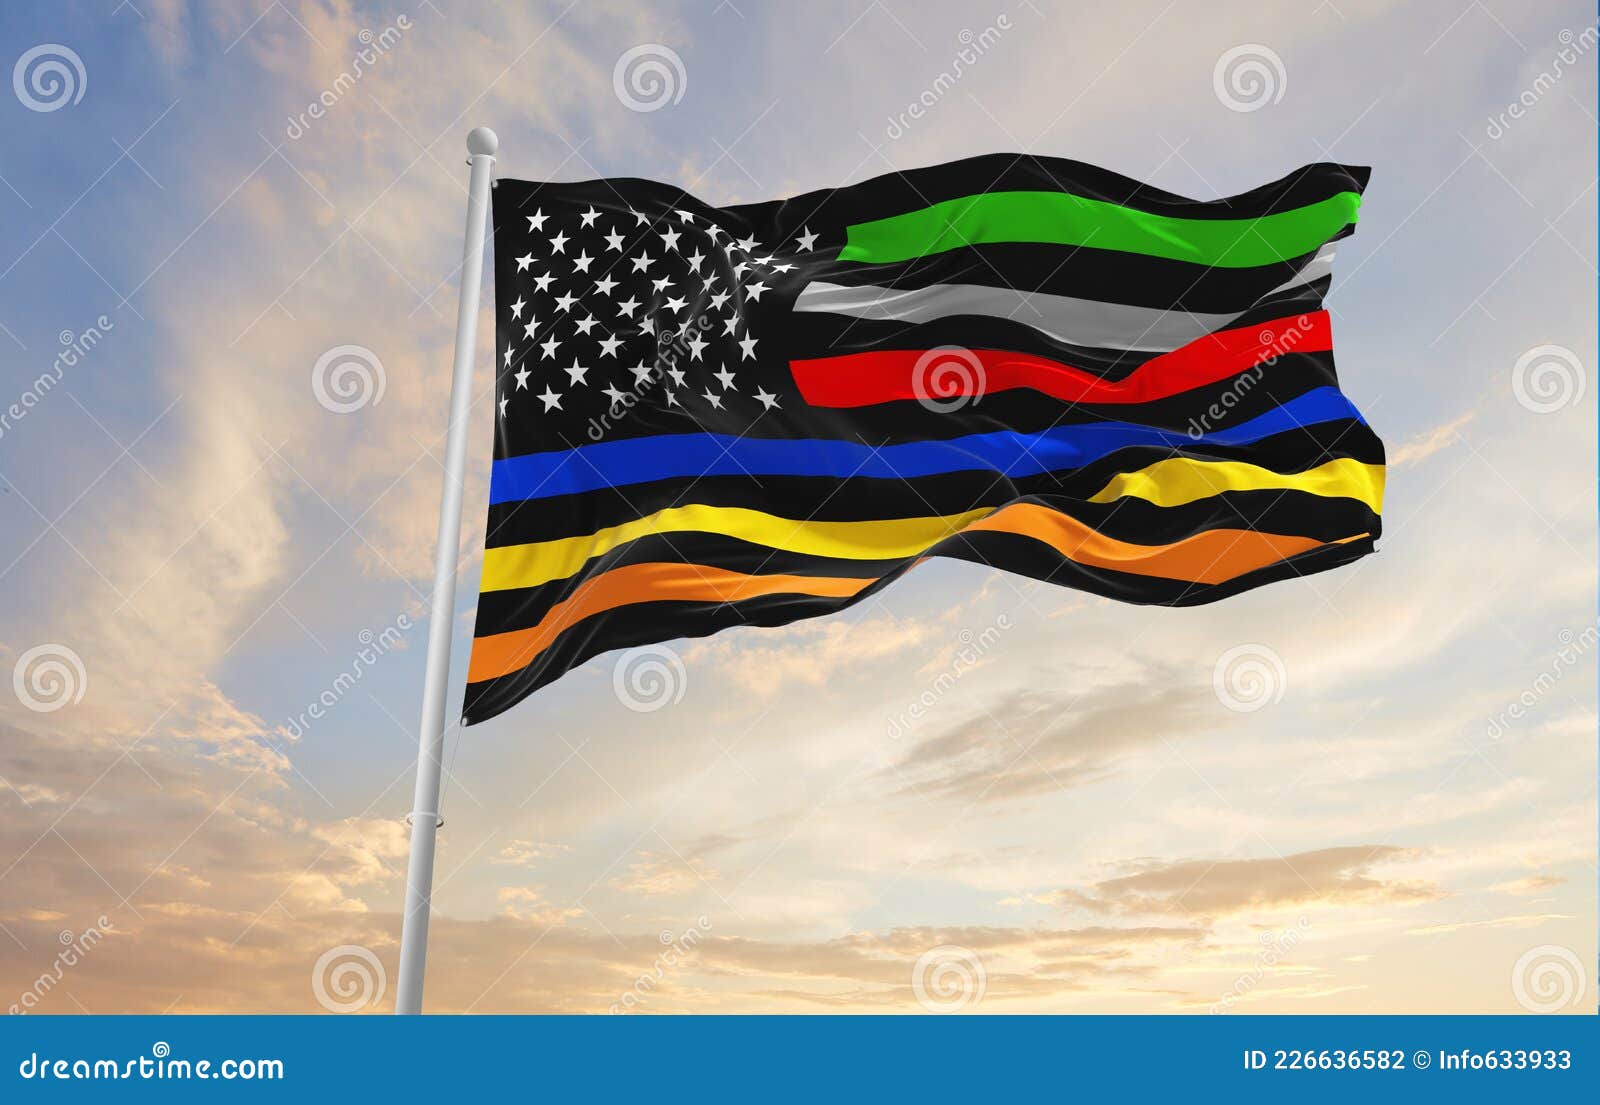 thin line first responder flag waving at cloudy sky background on sunset, panoramic view. copy space for wide banner. 3d